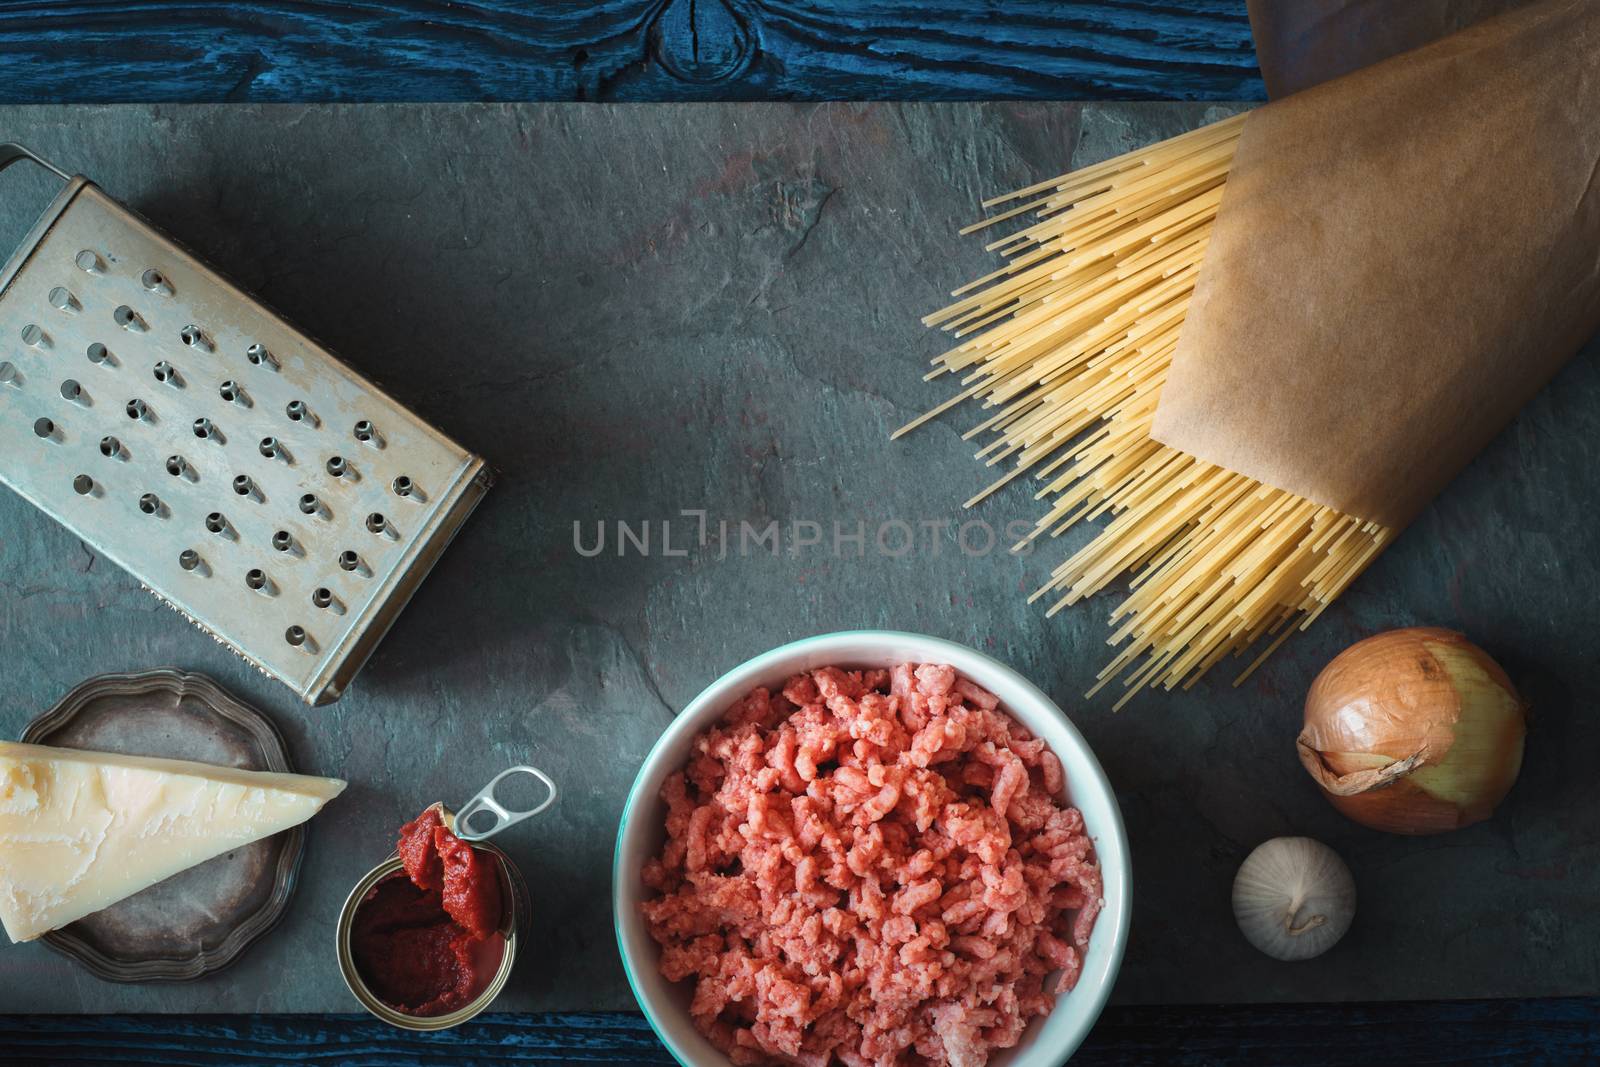 Ingredients for spaghetti with meatball on the stone background horizontal by Deniskarpenkov